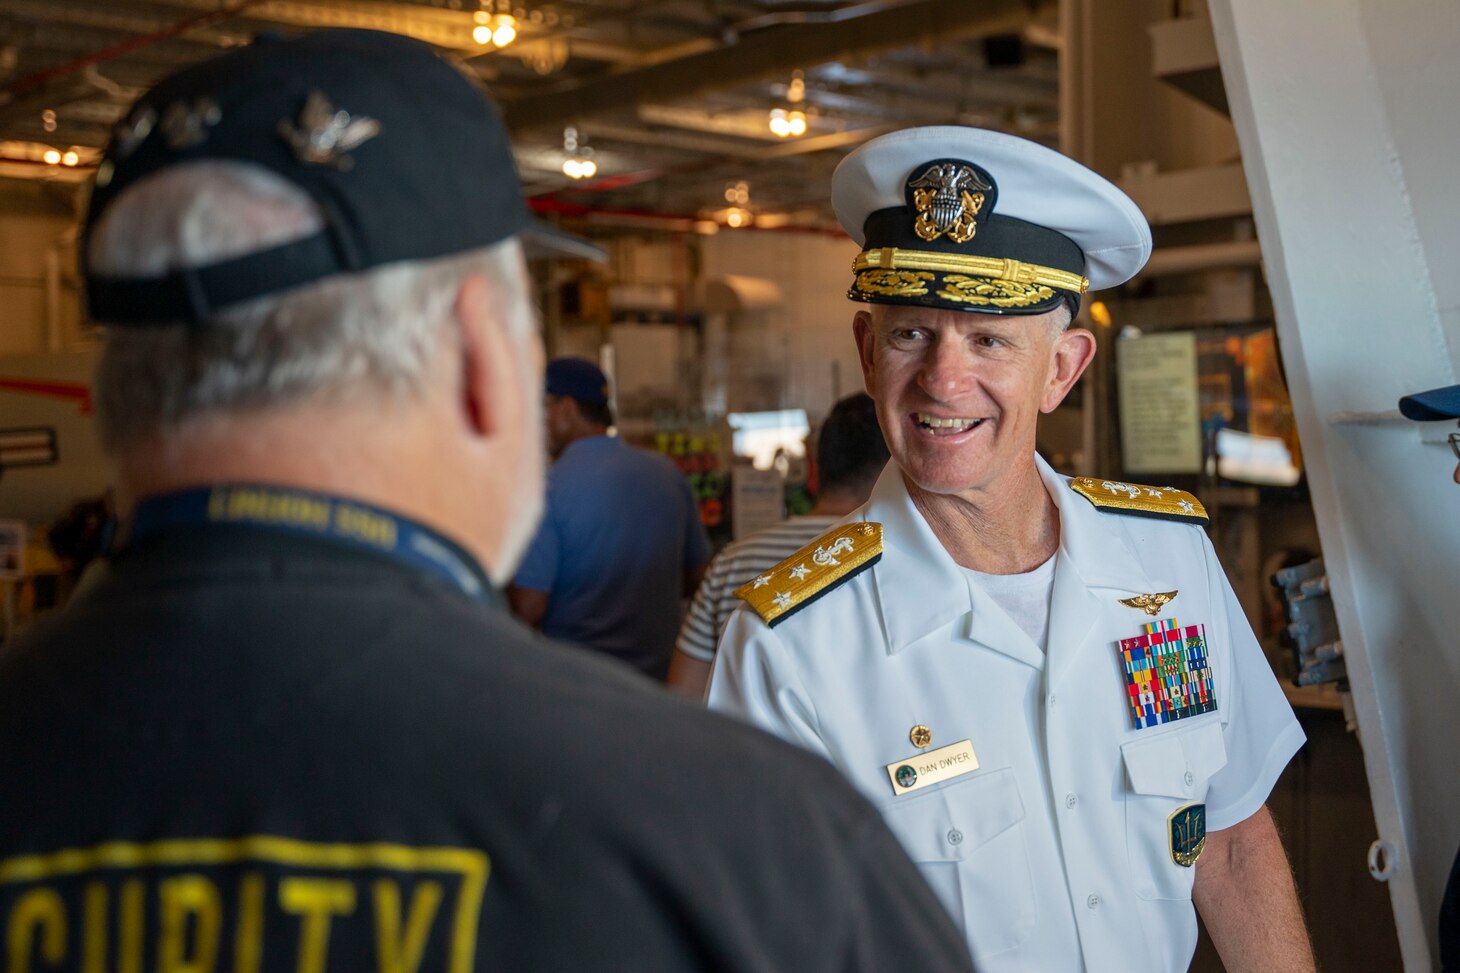 Vice Adm. Daniel Dwyer, commander, U.S. 2nd Fleet, greets visitors, volunteers, workers aboard the USS Hornet Sea, Air and Space Museum during the 100th Anniversary of the Aircraft Carrier ceremony in Alameda, Calif., August 13.